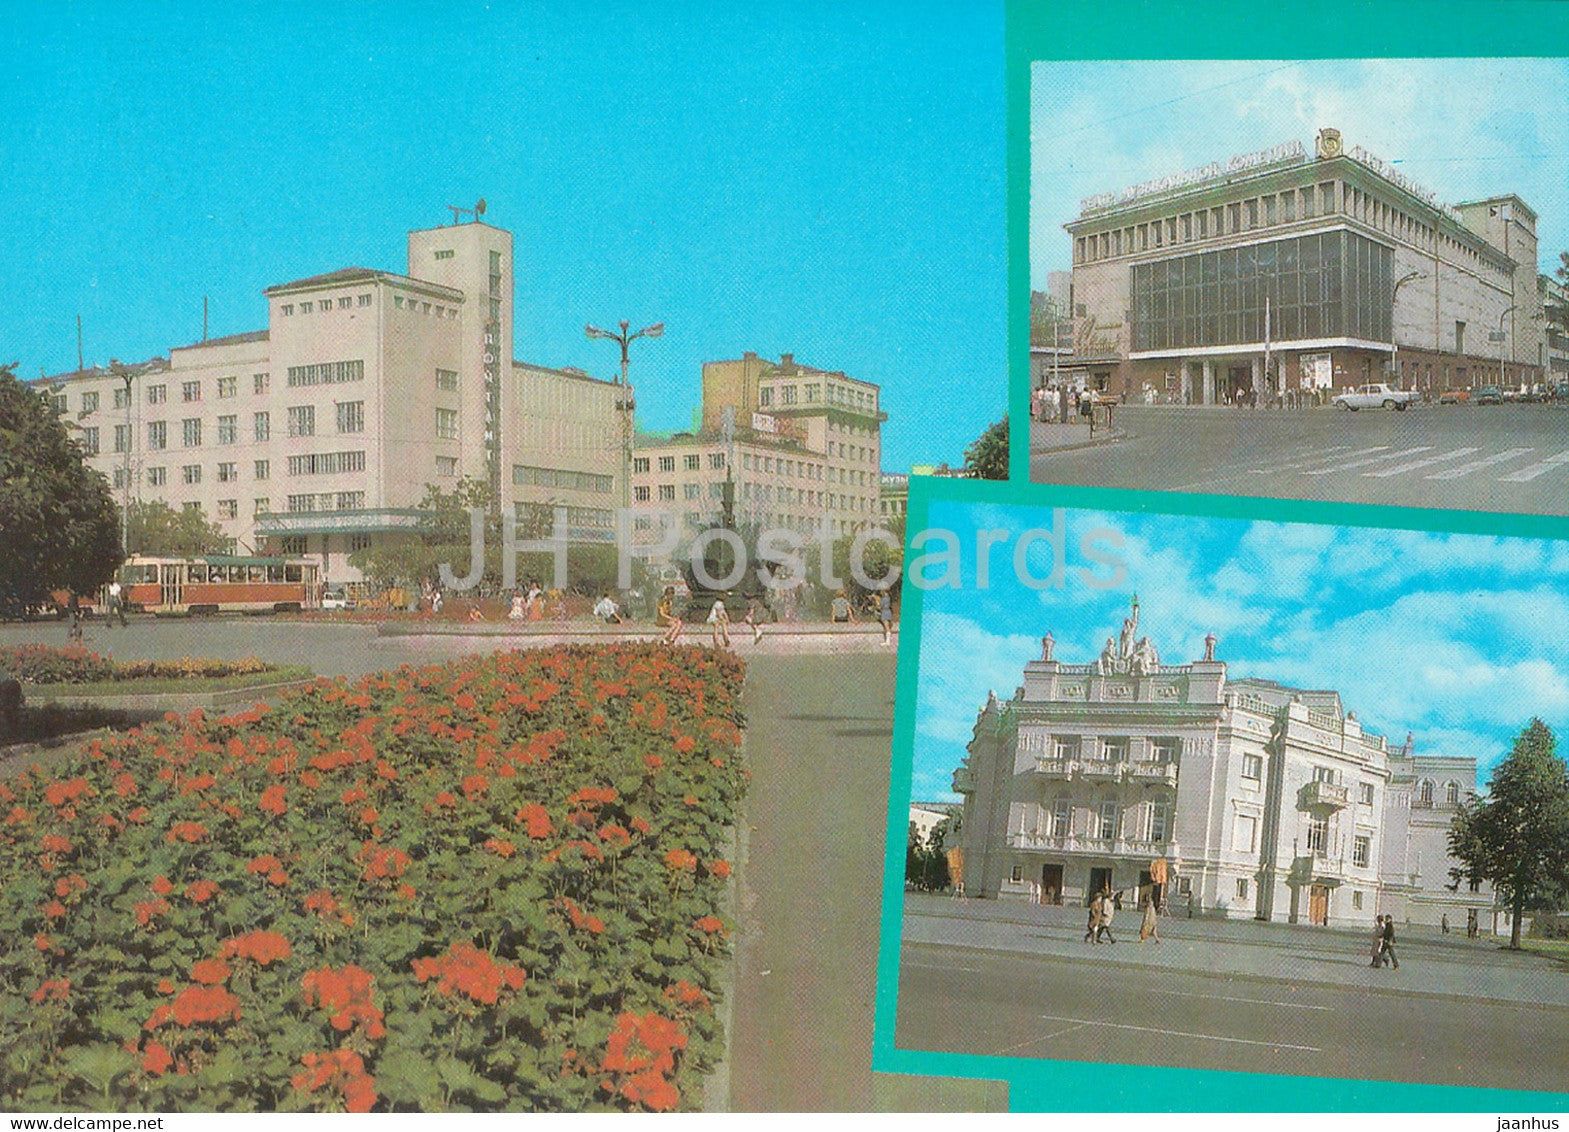 Sverdlovsk - Yekaterinburg - Work square - Musical Comedy and Opera and Ballet theatre  tram - 1987 Russia USSR - unused - JH Postcards